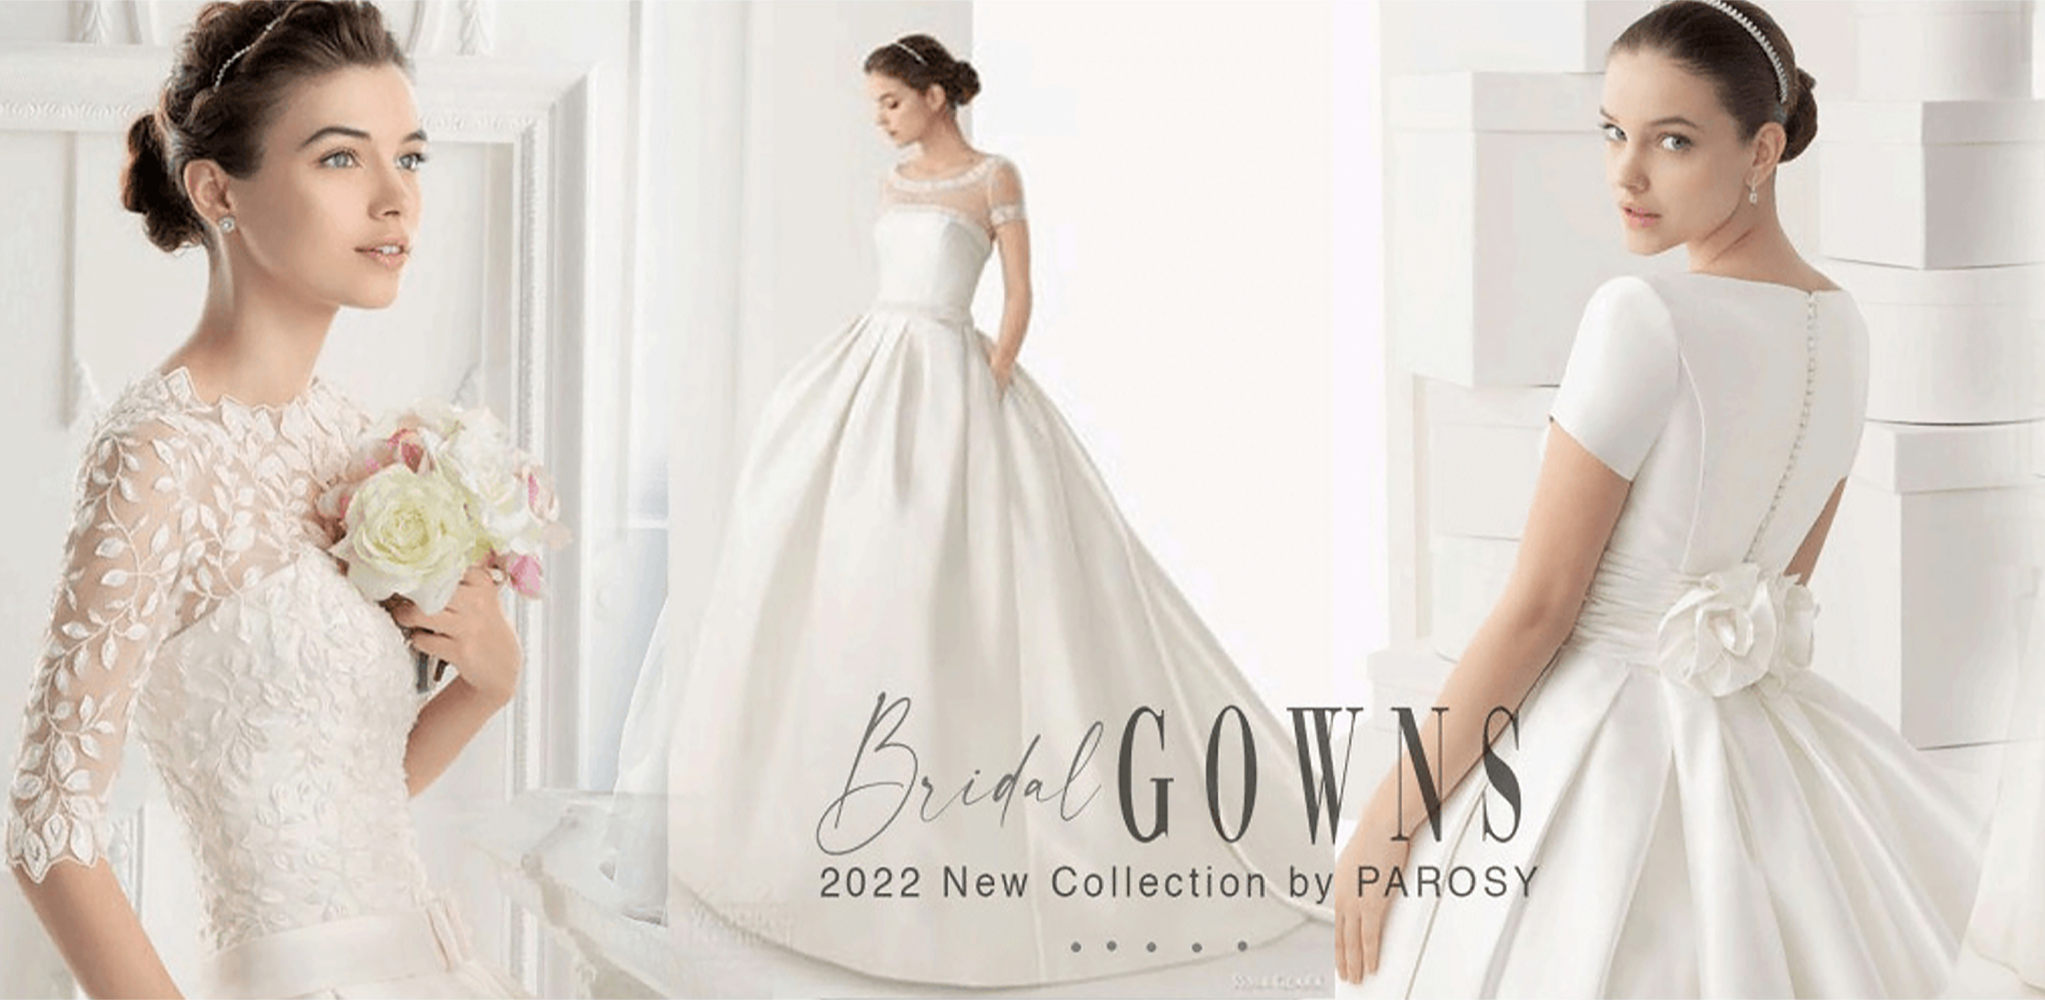 BRIDAL GOWNS